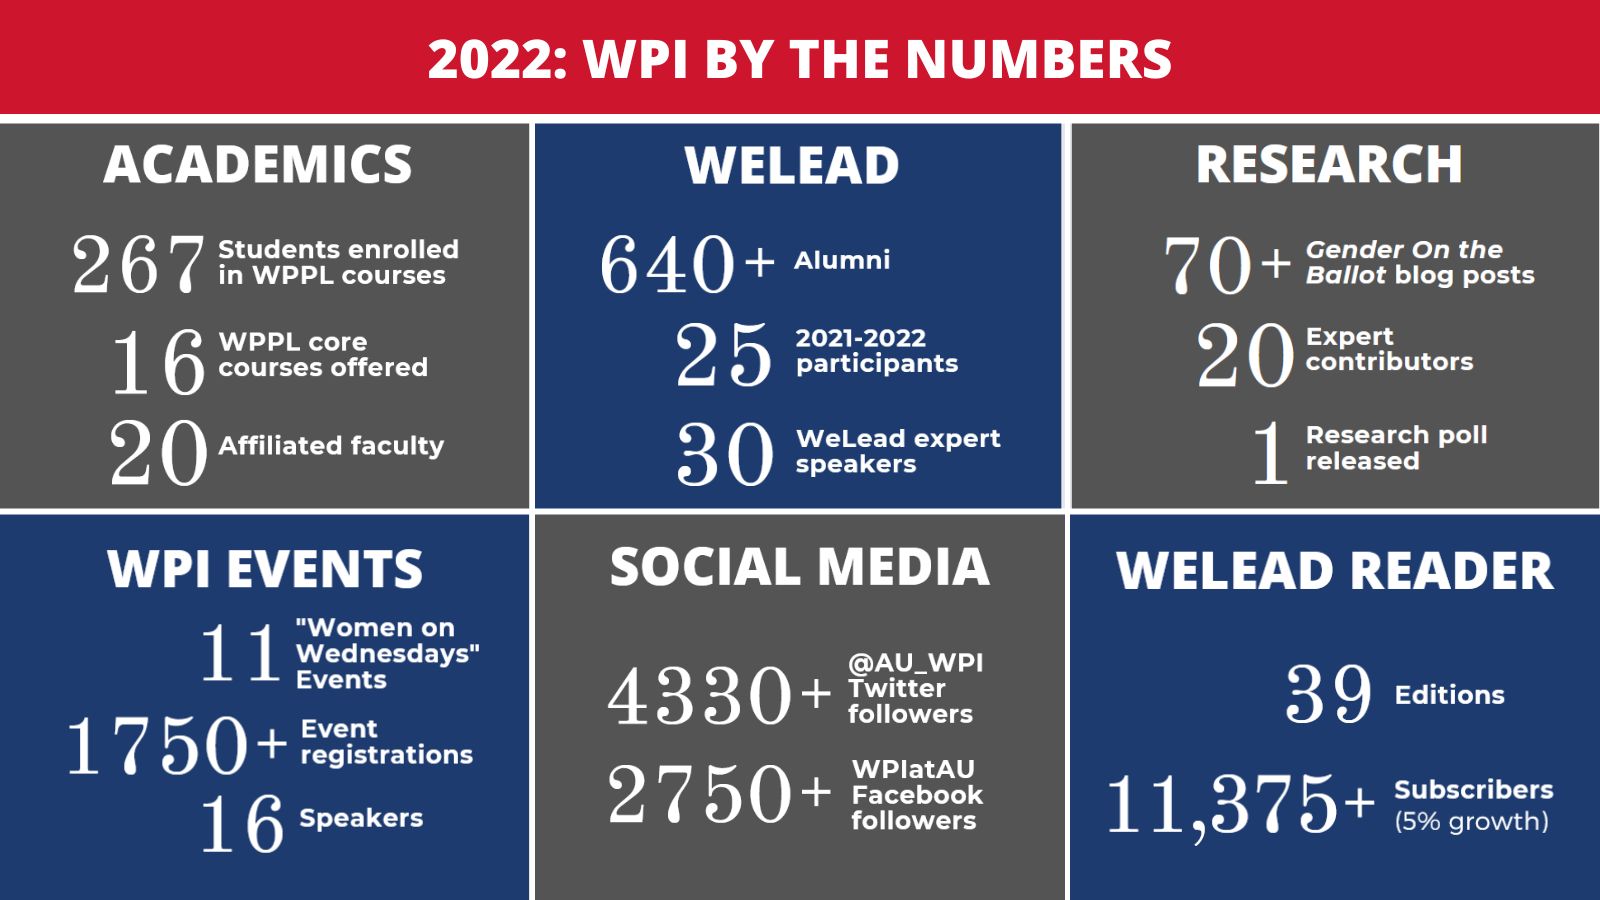 2022 by the numbers